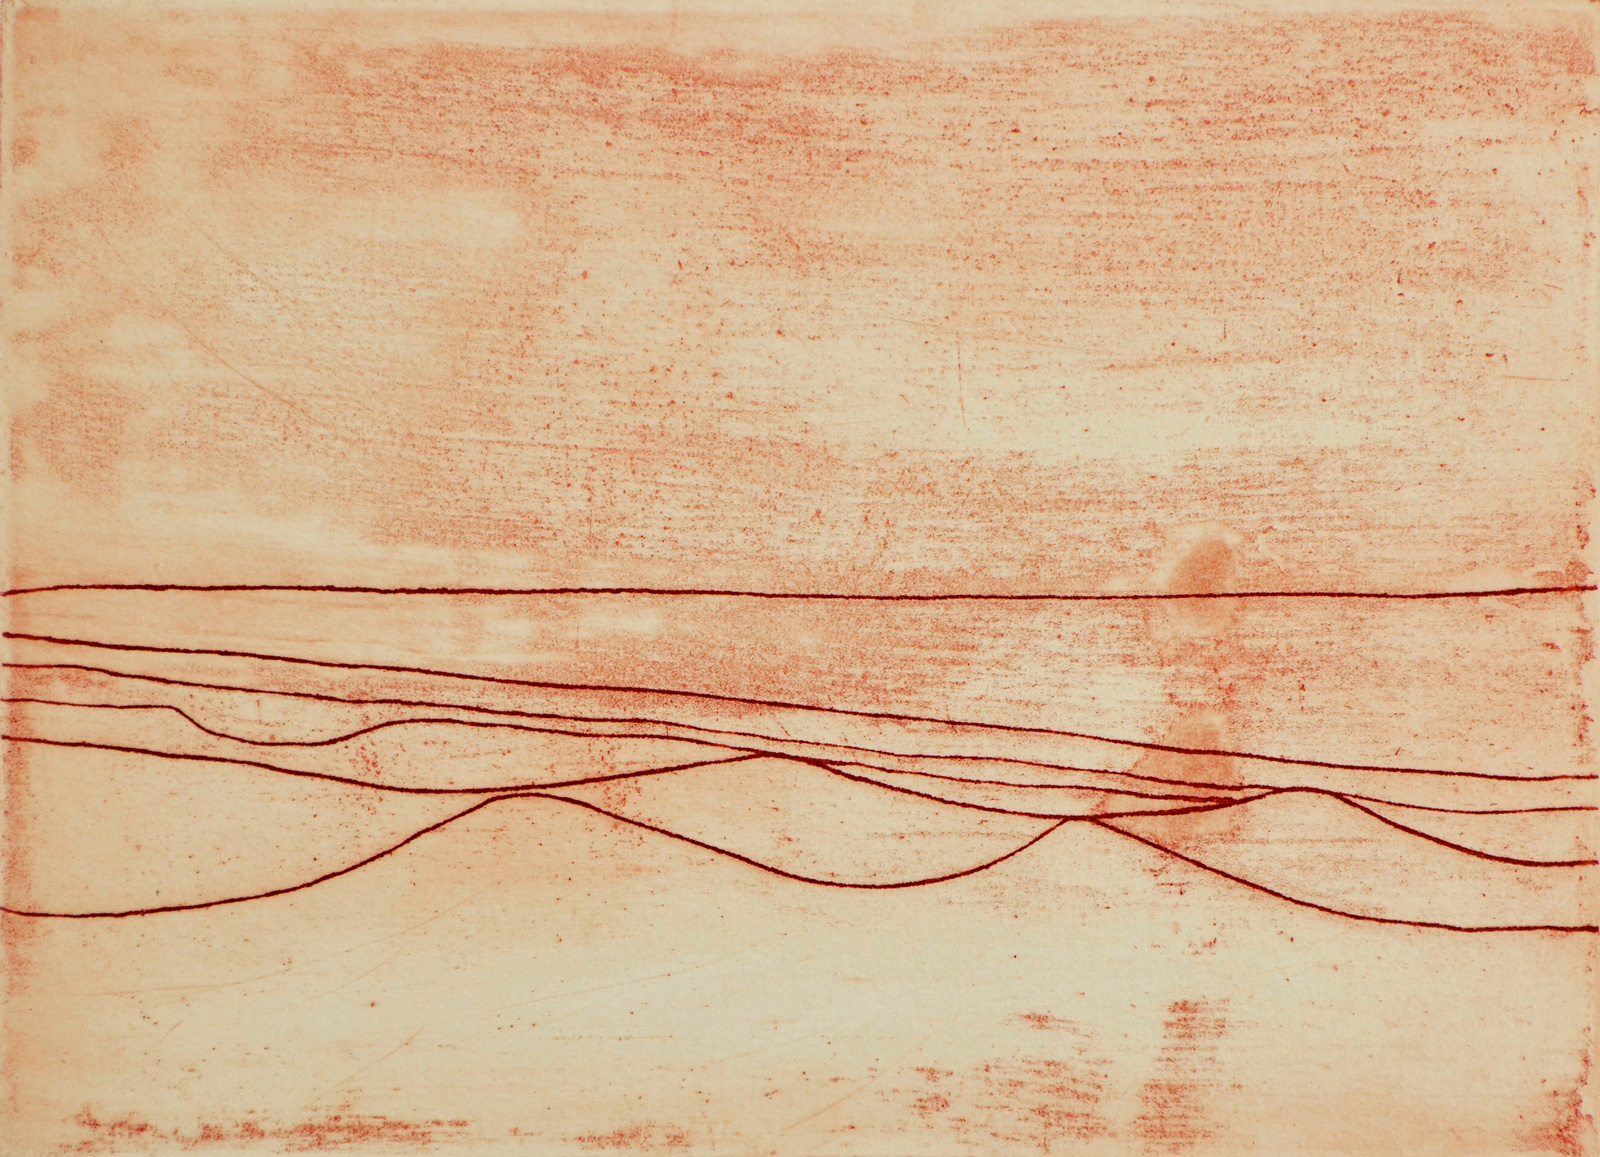 An etching in red-brown ink with 6 wavy lines representing the sea and horizon